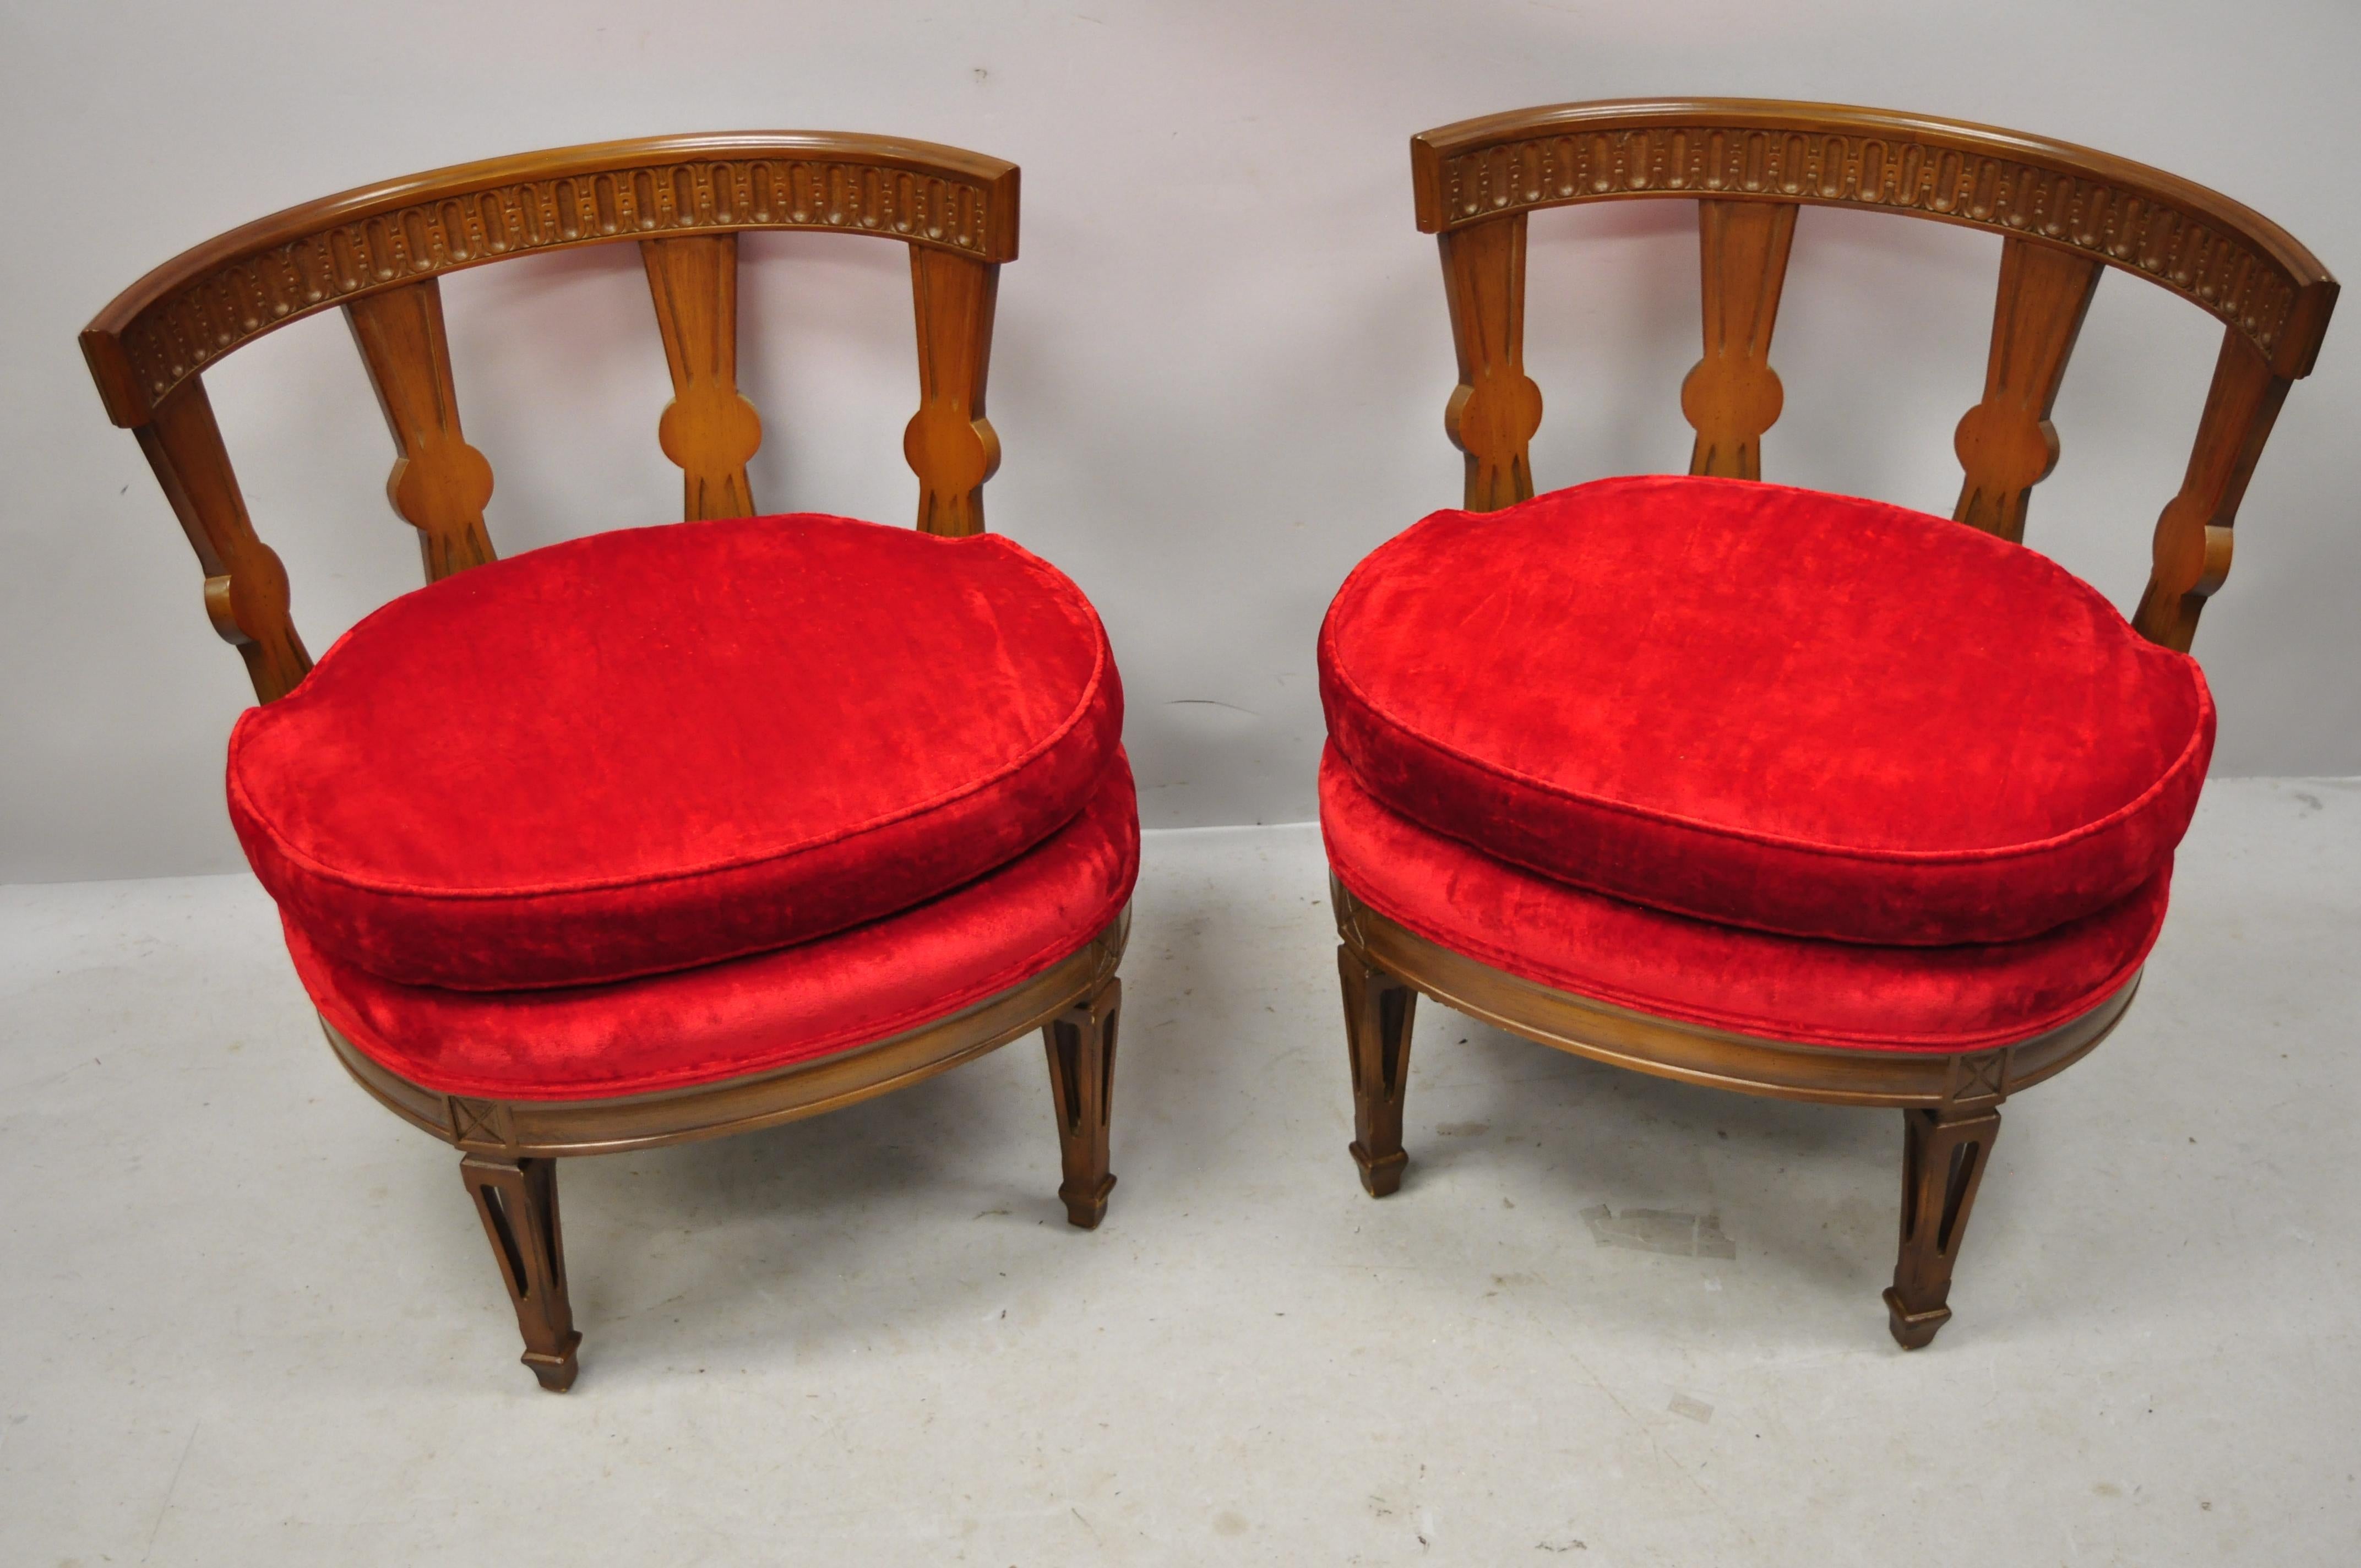  Hollywood Regency Italian Low Barrel Back Red Slipper Lounge Chairs - a Pair 4